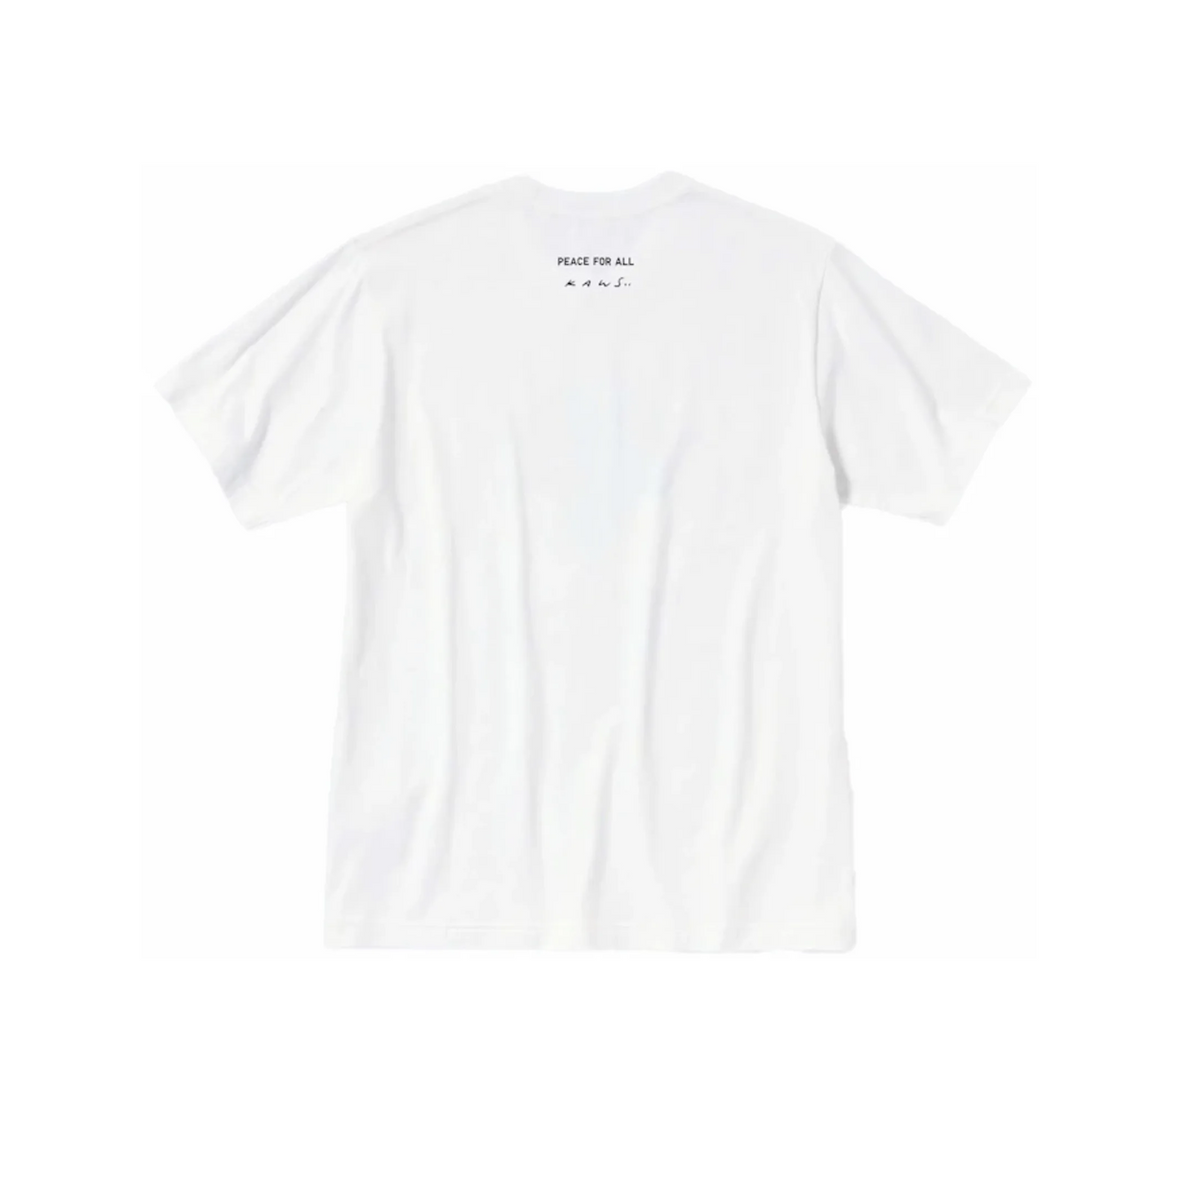 KAWS x Uniqlo Peace For All S/S Graphic T-shirt "White"